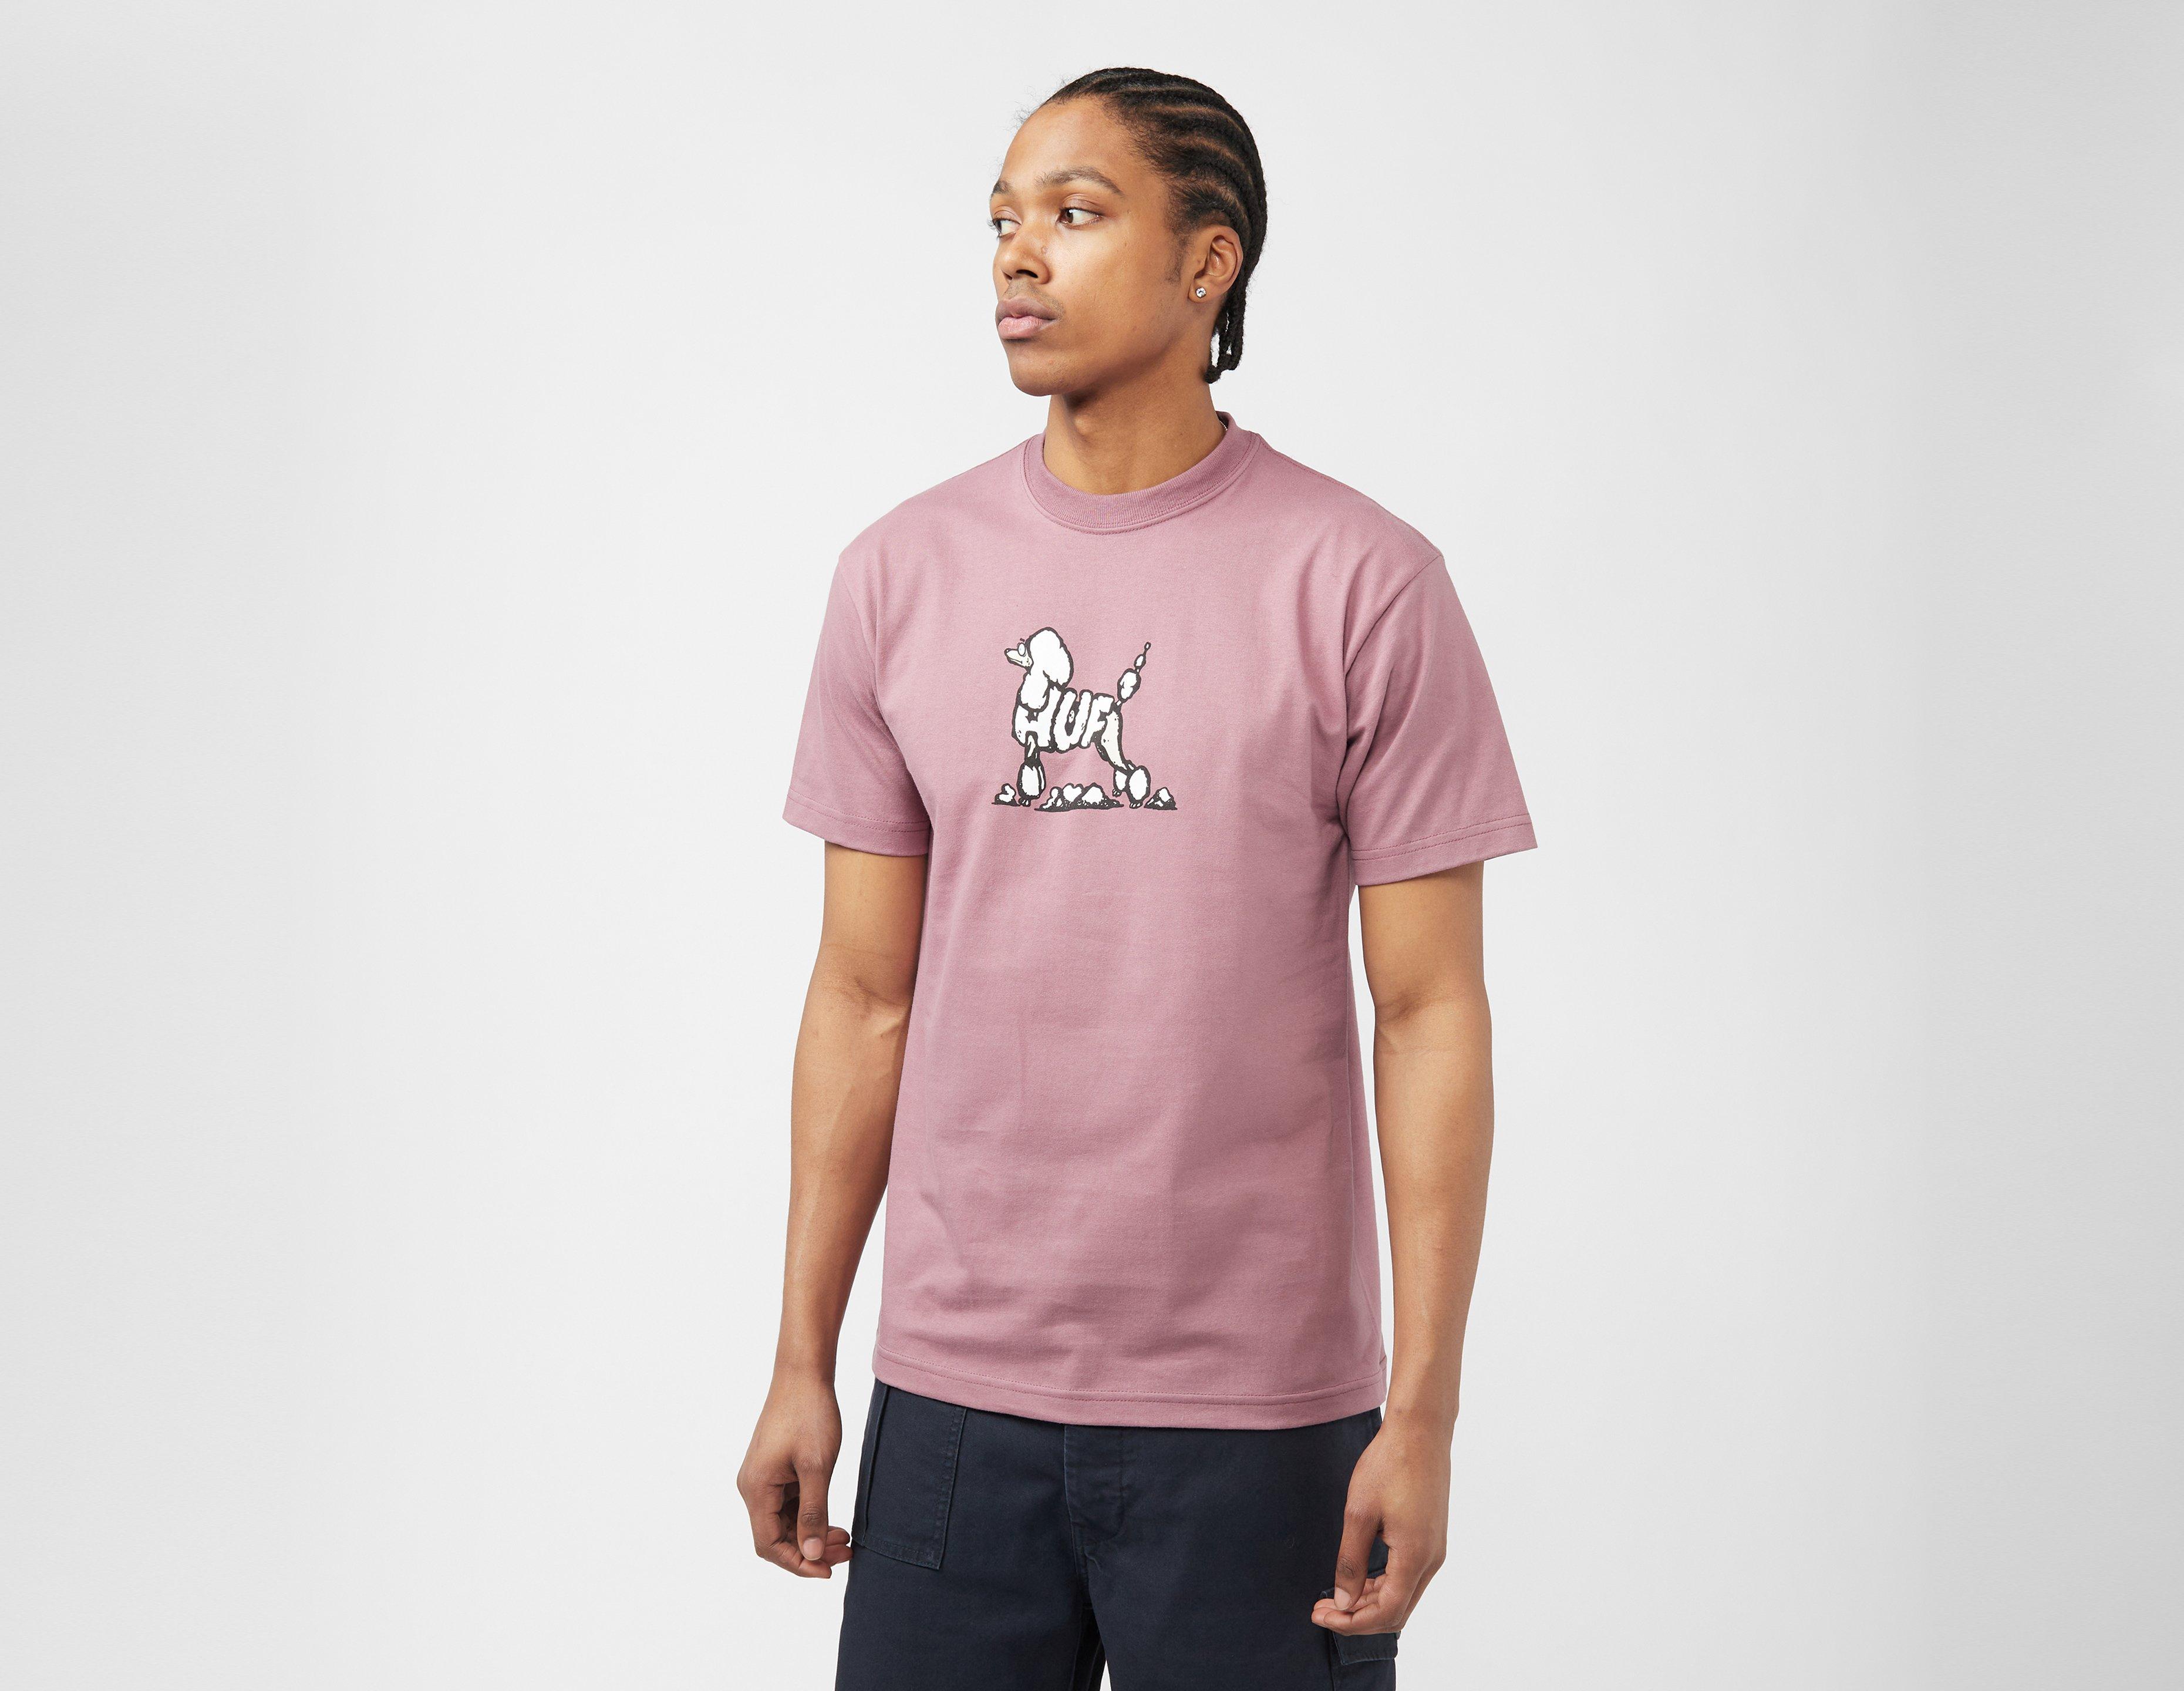 Healthdesign? | Shirt - Pink Huf Best In Show T - unchained back print t- shirt in black acid wash